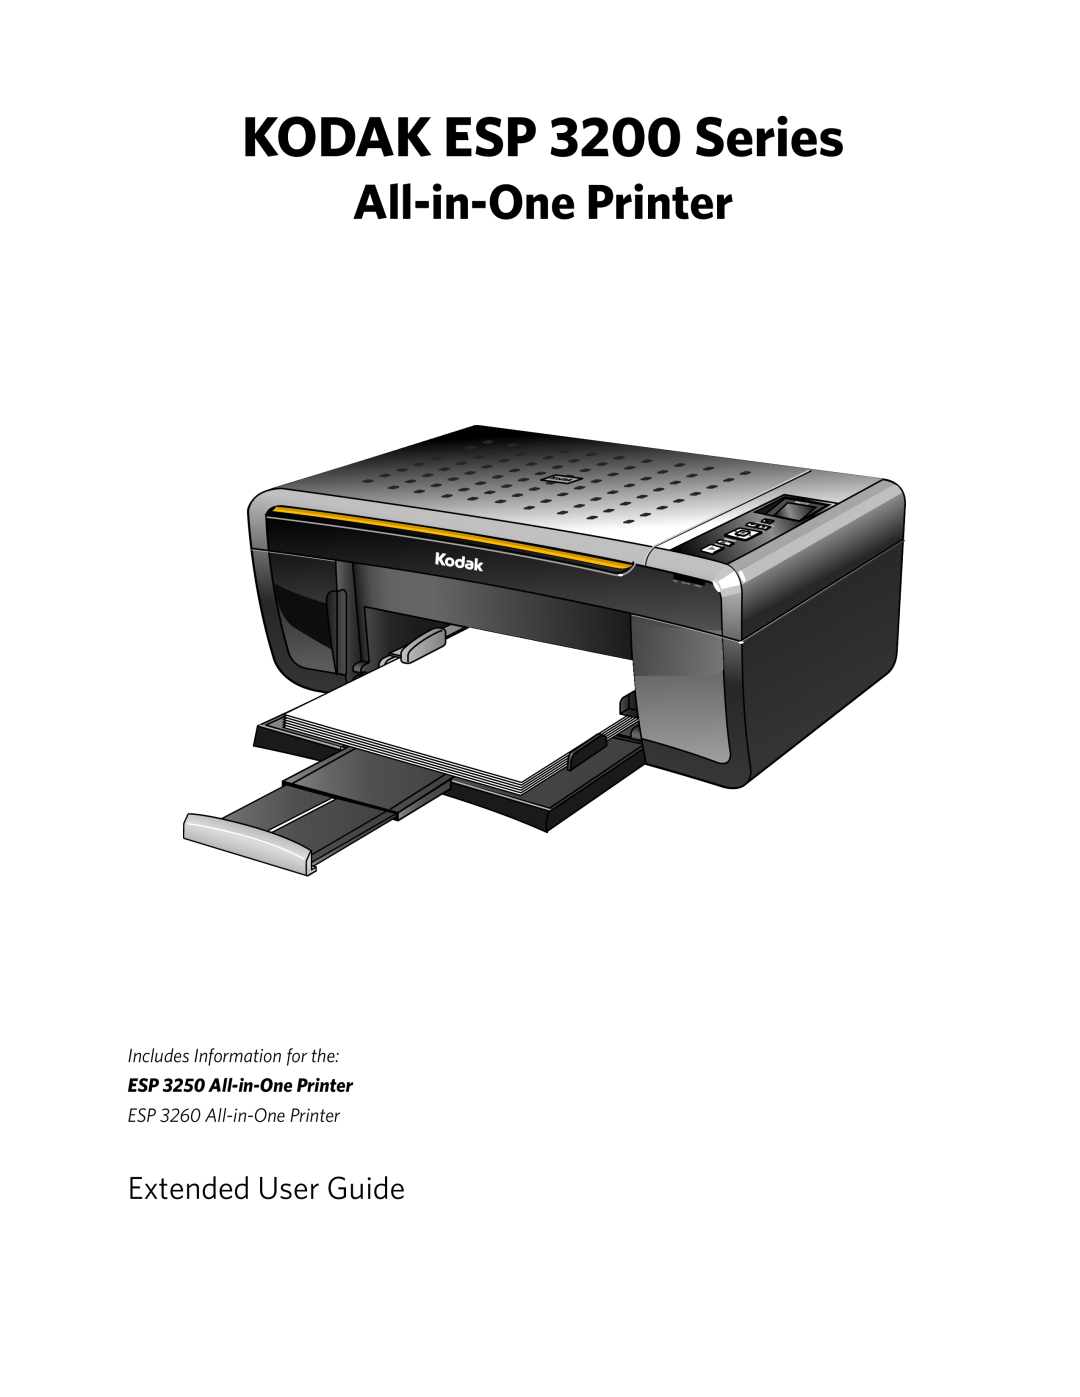 Kodak manual KODAK ESP 3200 Series, All-in-One Printer, Extended User Guide, Includes Information for the, Back H ome 